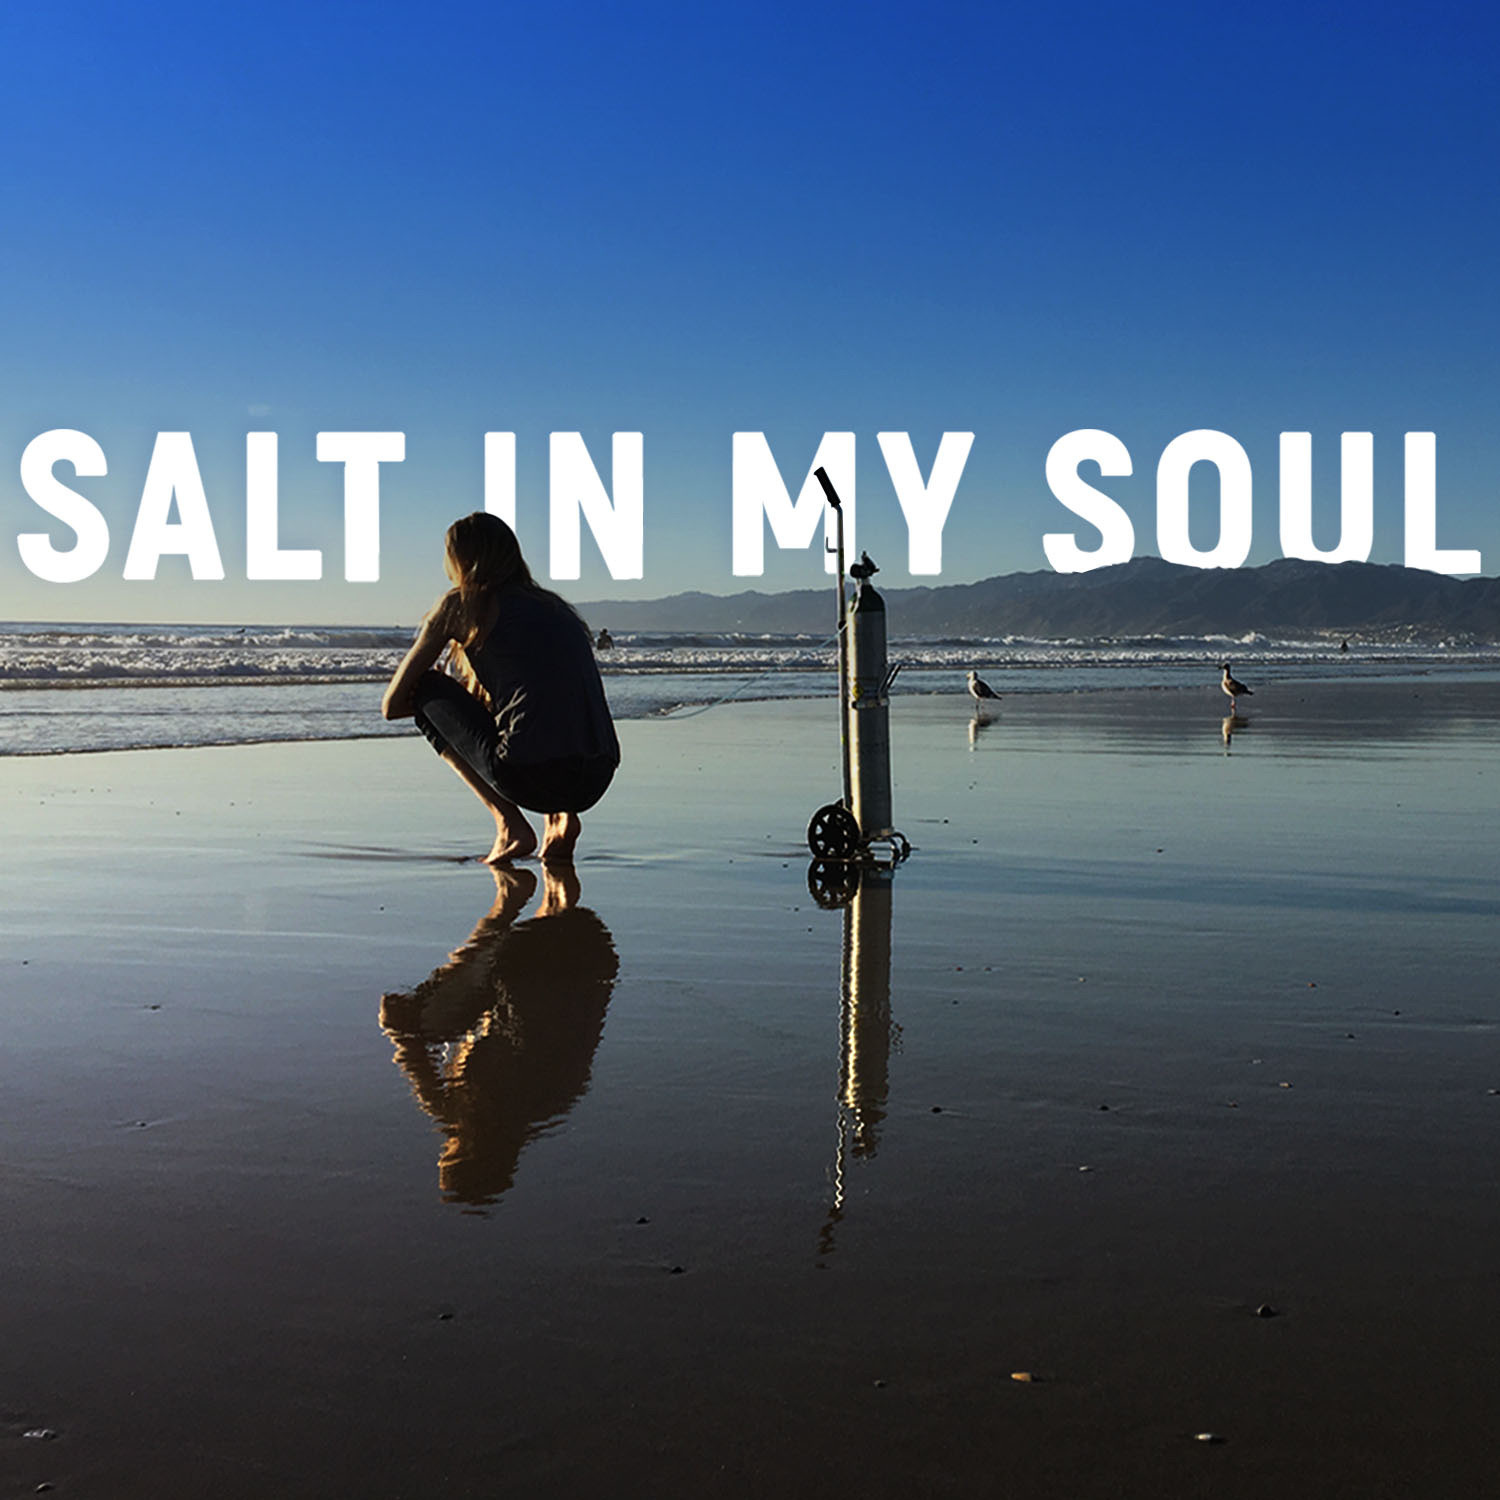 Salt in My Soul (credit: Giant Pictures)